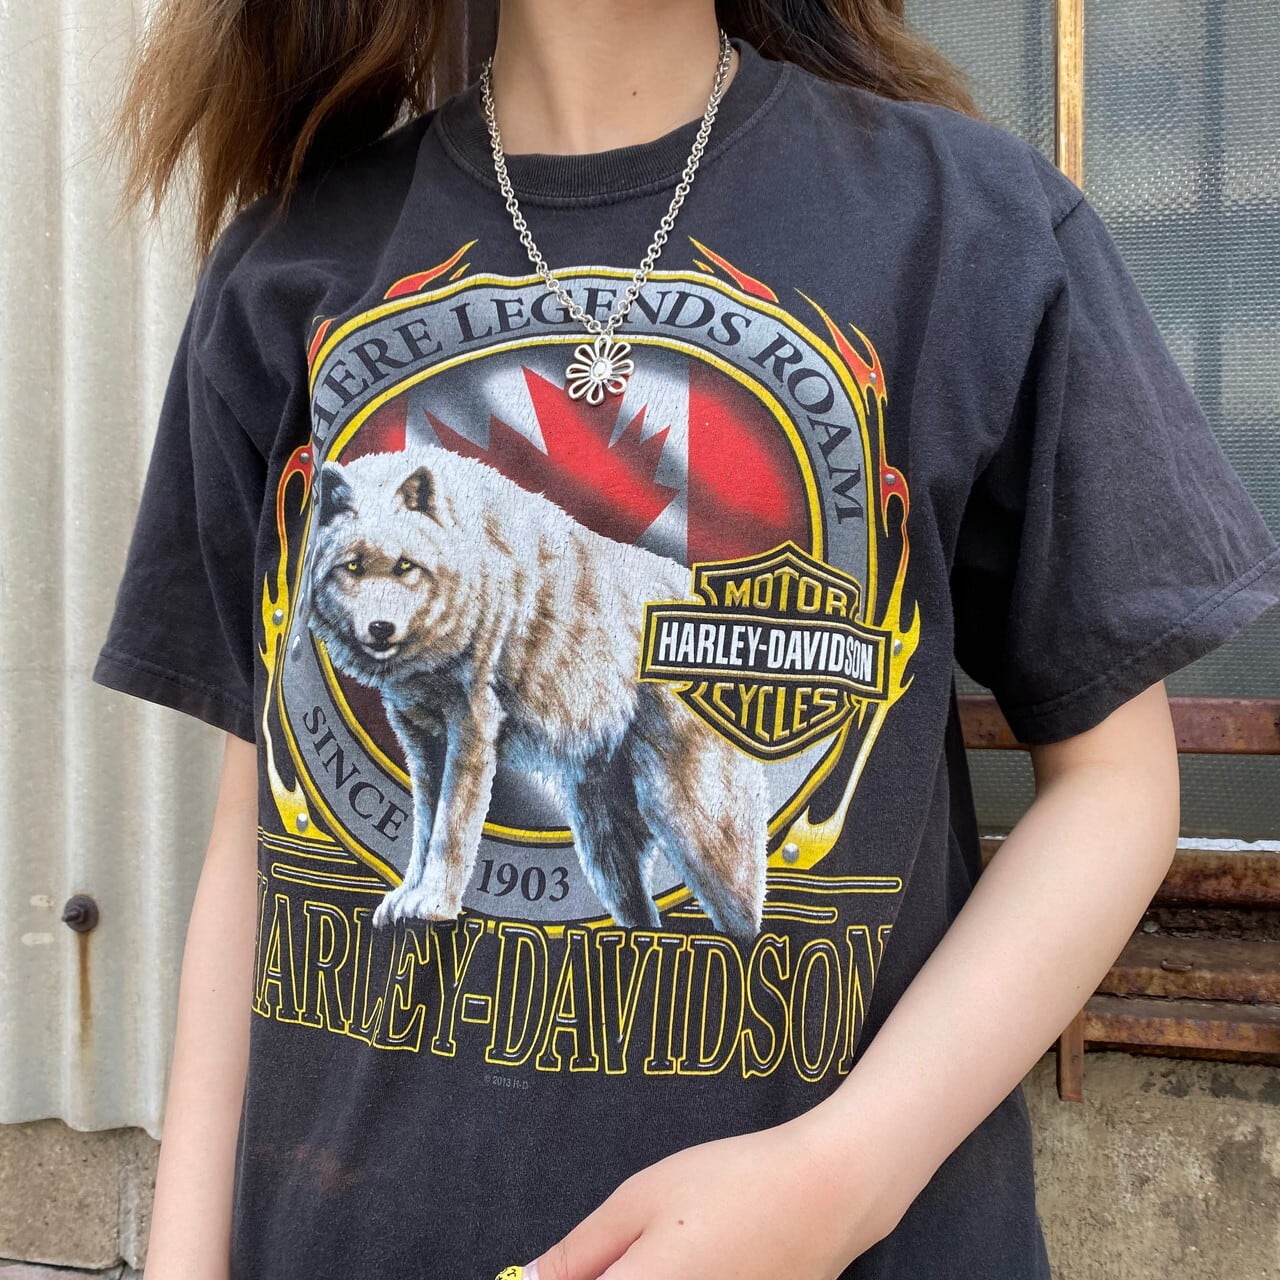 Harley-Davidson ハーレーダビッドソン オオカミ 両面プリントTシャツ メンズM 古着 バックプリント ブラック  黒【Tシャツ】【VC】【SS2207-50a】 | cave 古着屋【公式】古着通販サイト powered by BASE